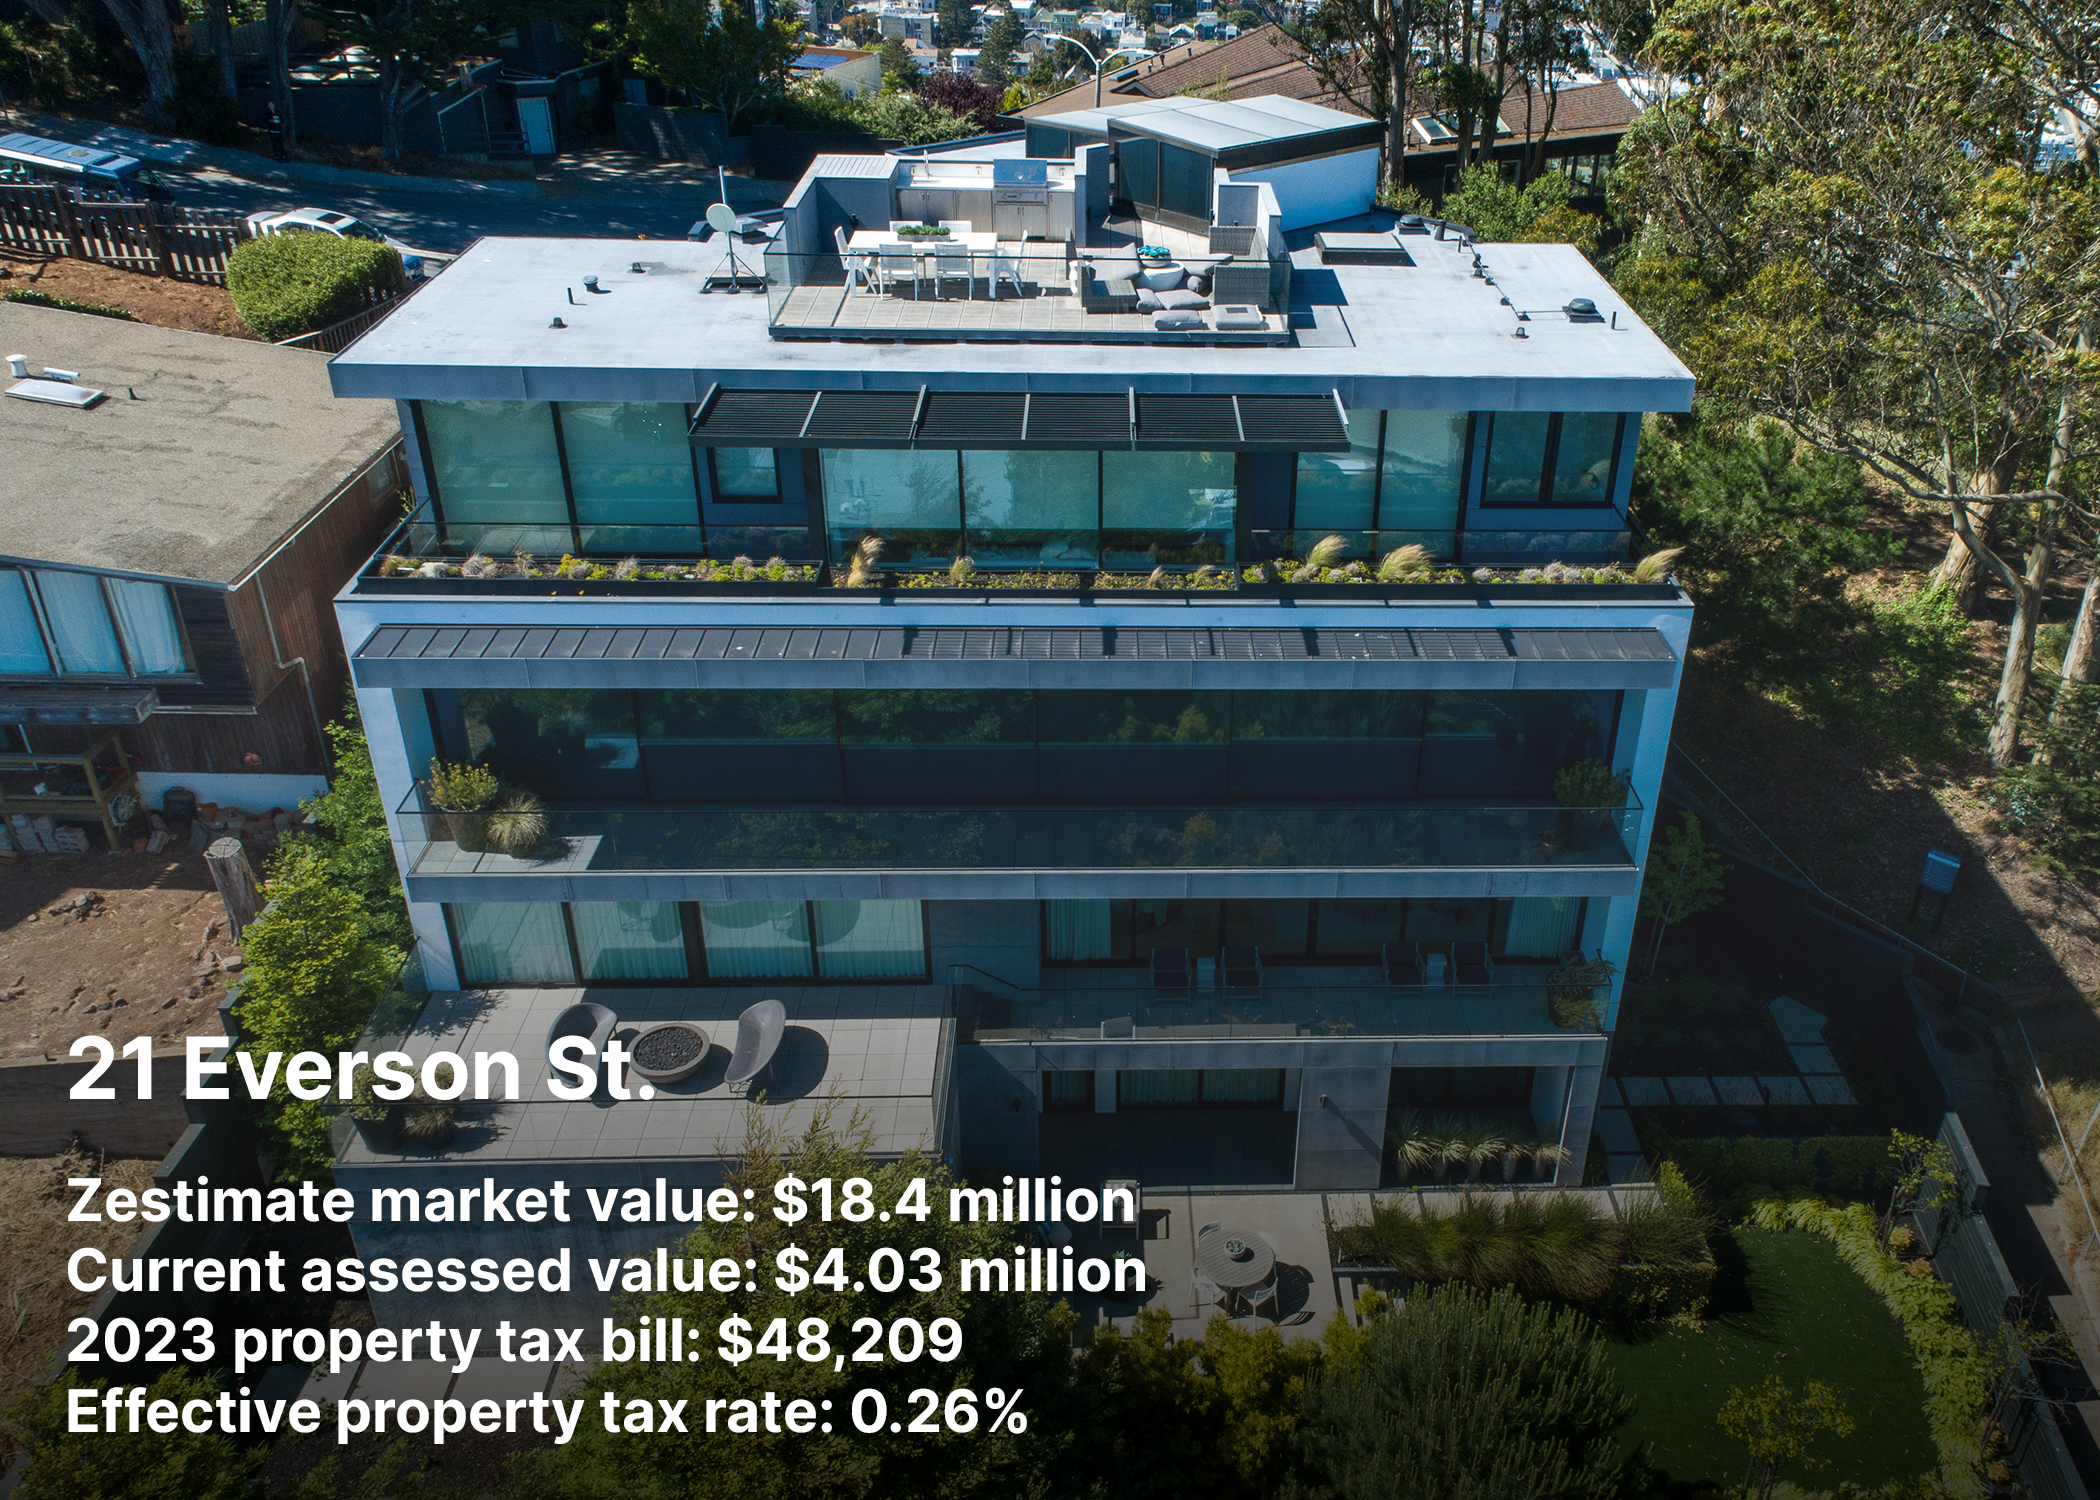 The image shows a modern multi-story home. Text mentions the address, 21 Everson St., and provides financial details including the home’s market value ($18.4M) and tax information.